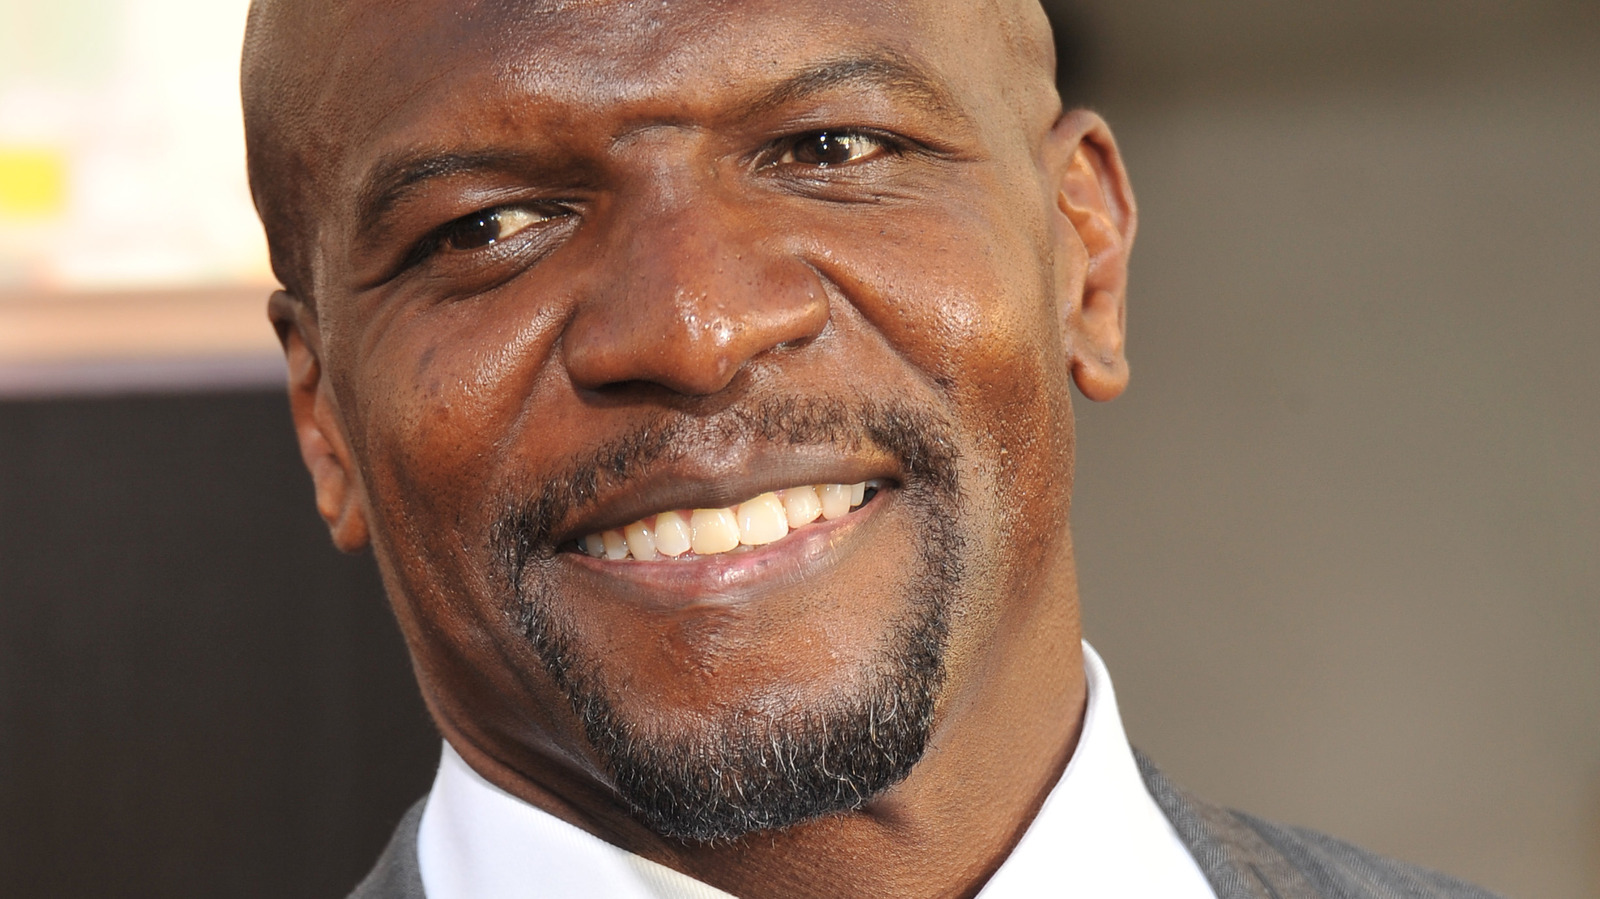 Terry Crews Opens Up About Playing in the NFL With a Severe Concussion